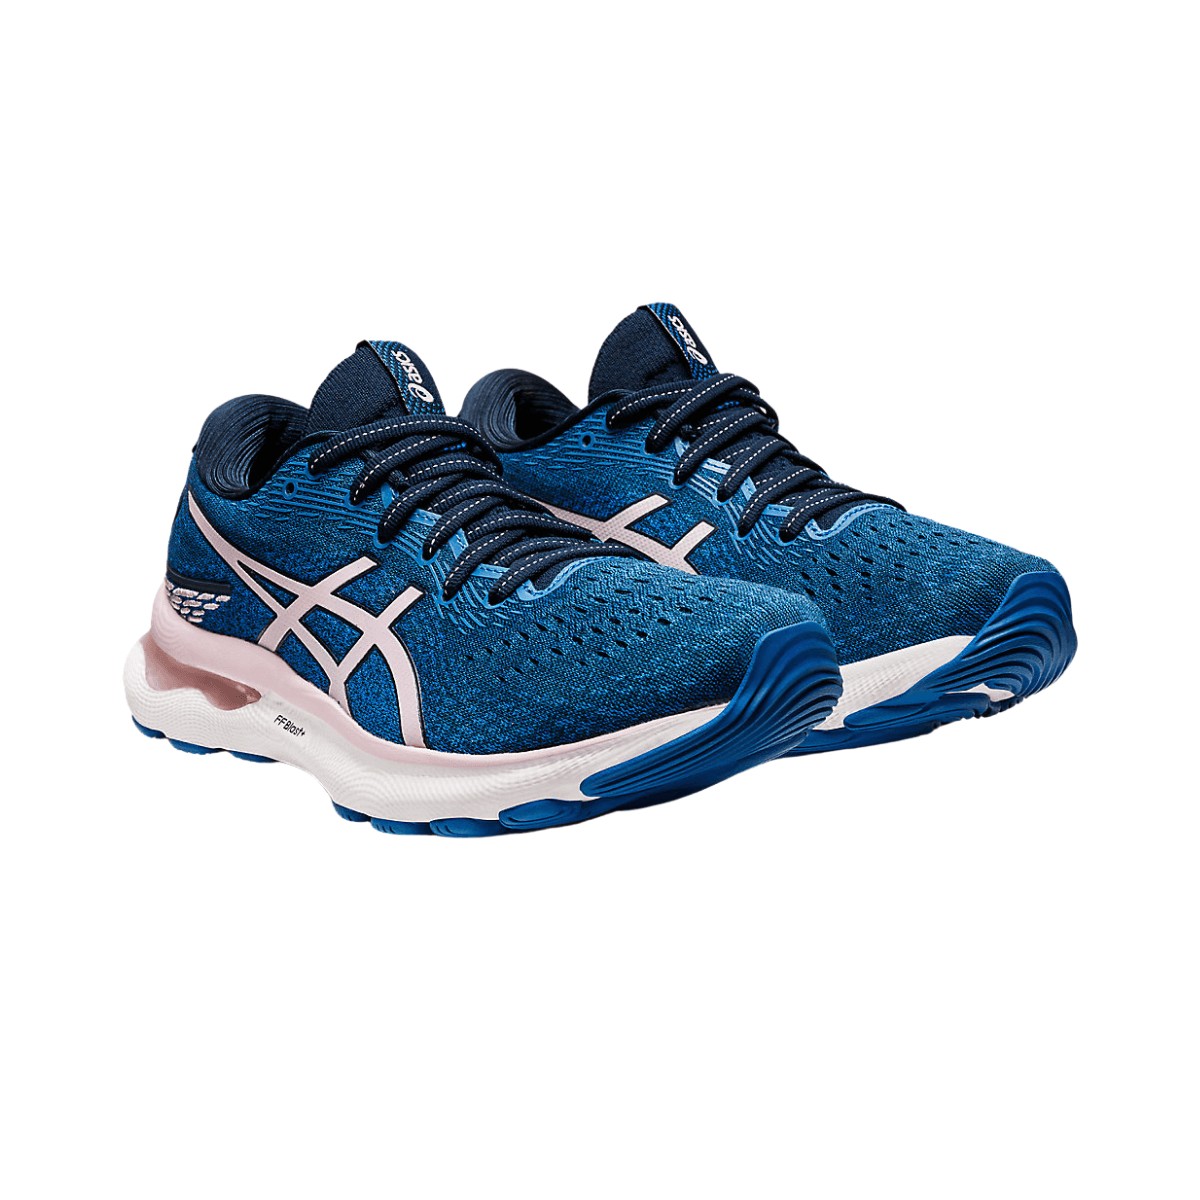 aguja Específico concierto Buy Asics Gel-Ninmbus 24 Women SS22 Running Shoes At the Best Price